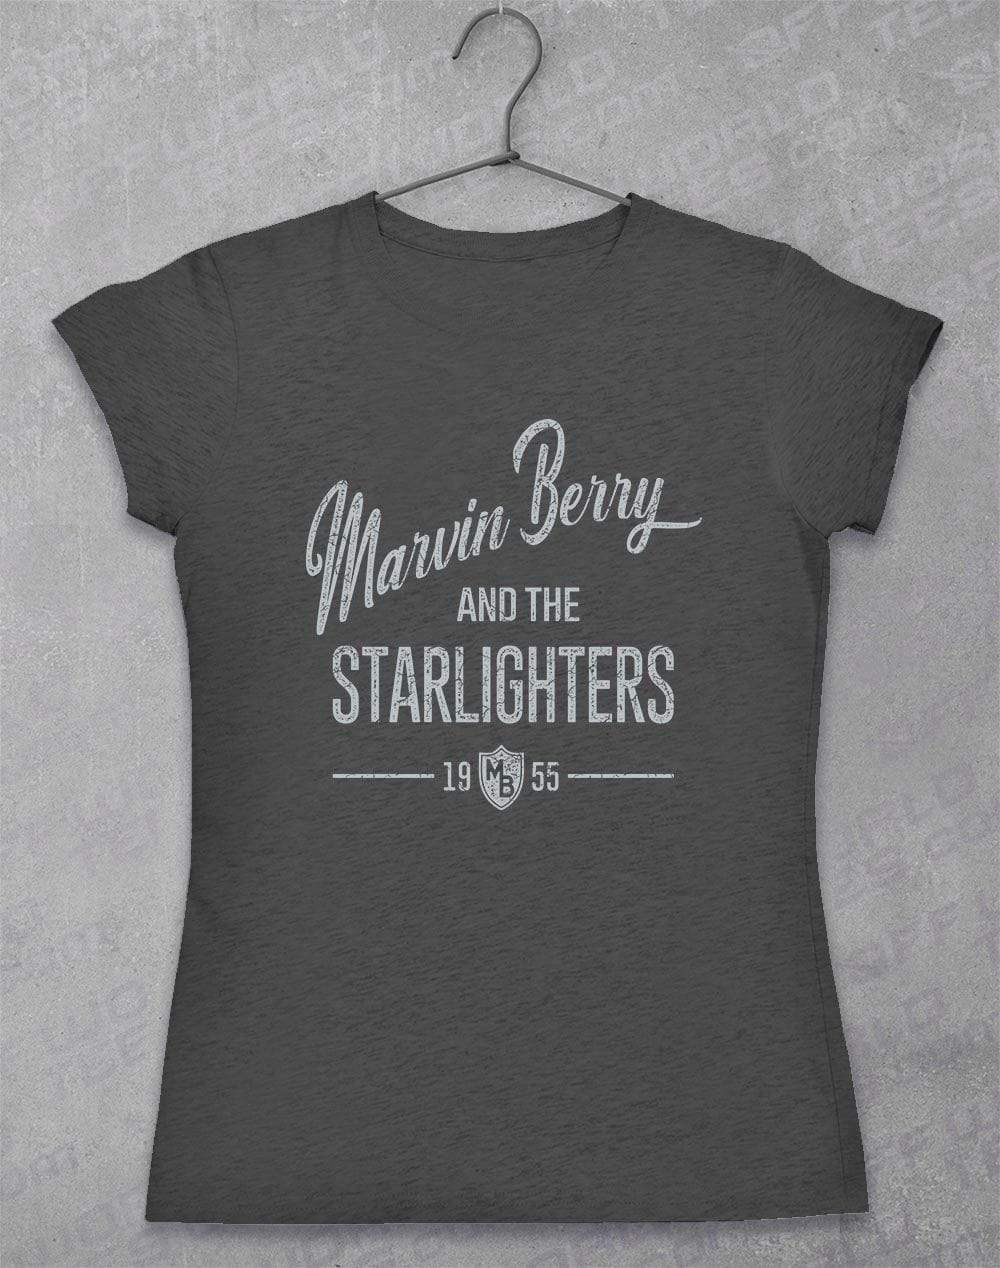 Marvin Berry and the Starlighters Women's T-Shirt  - Off World Tees